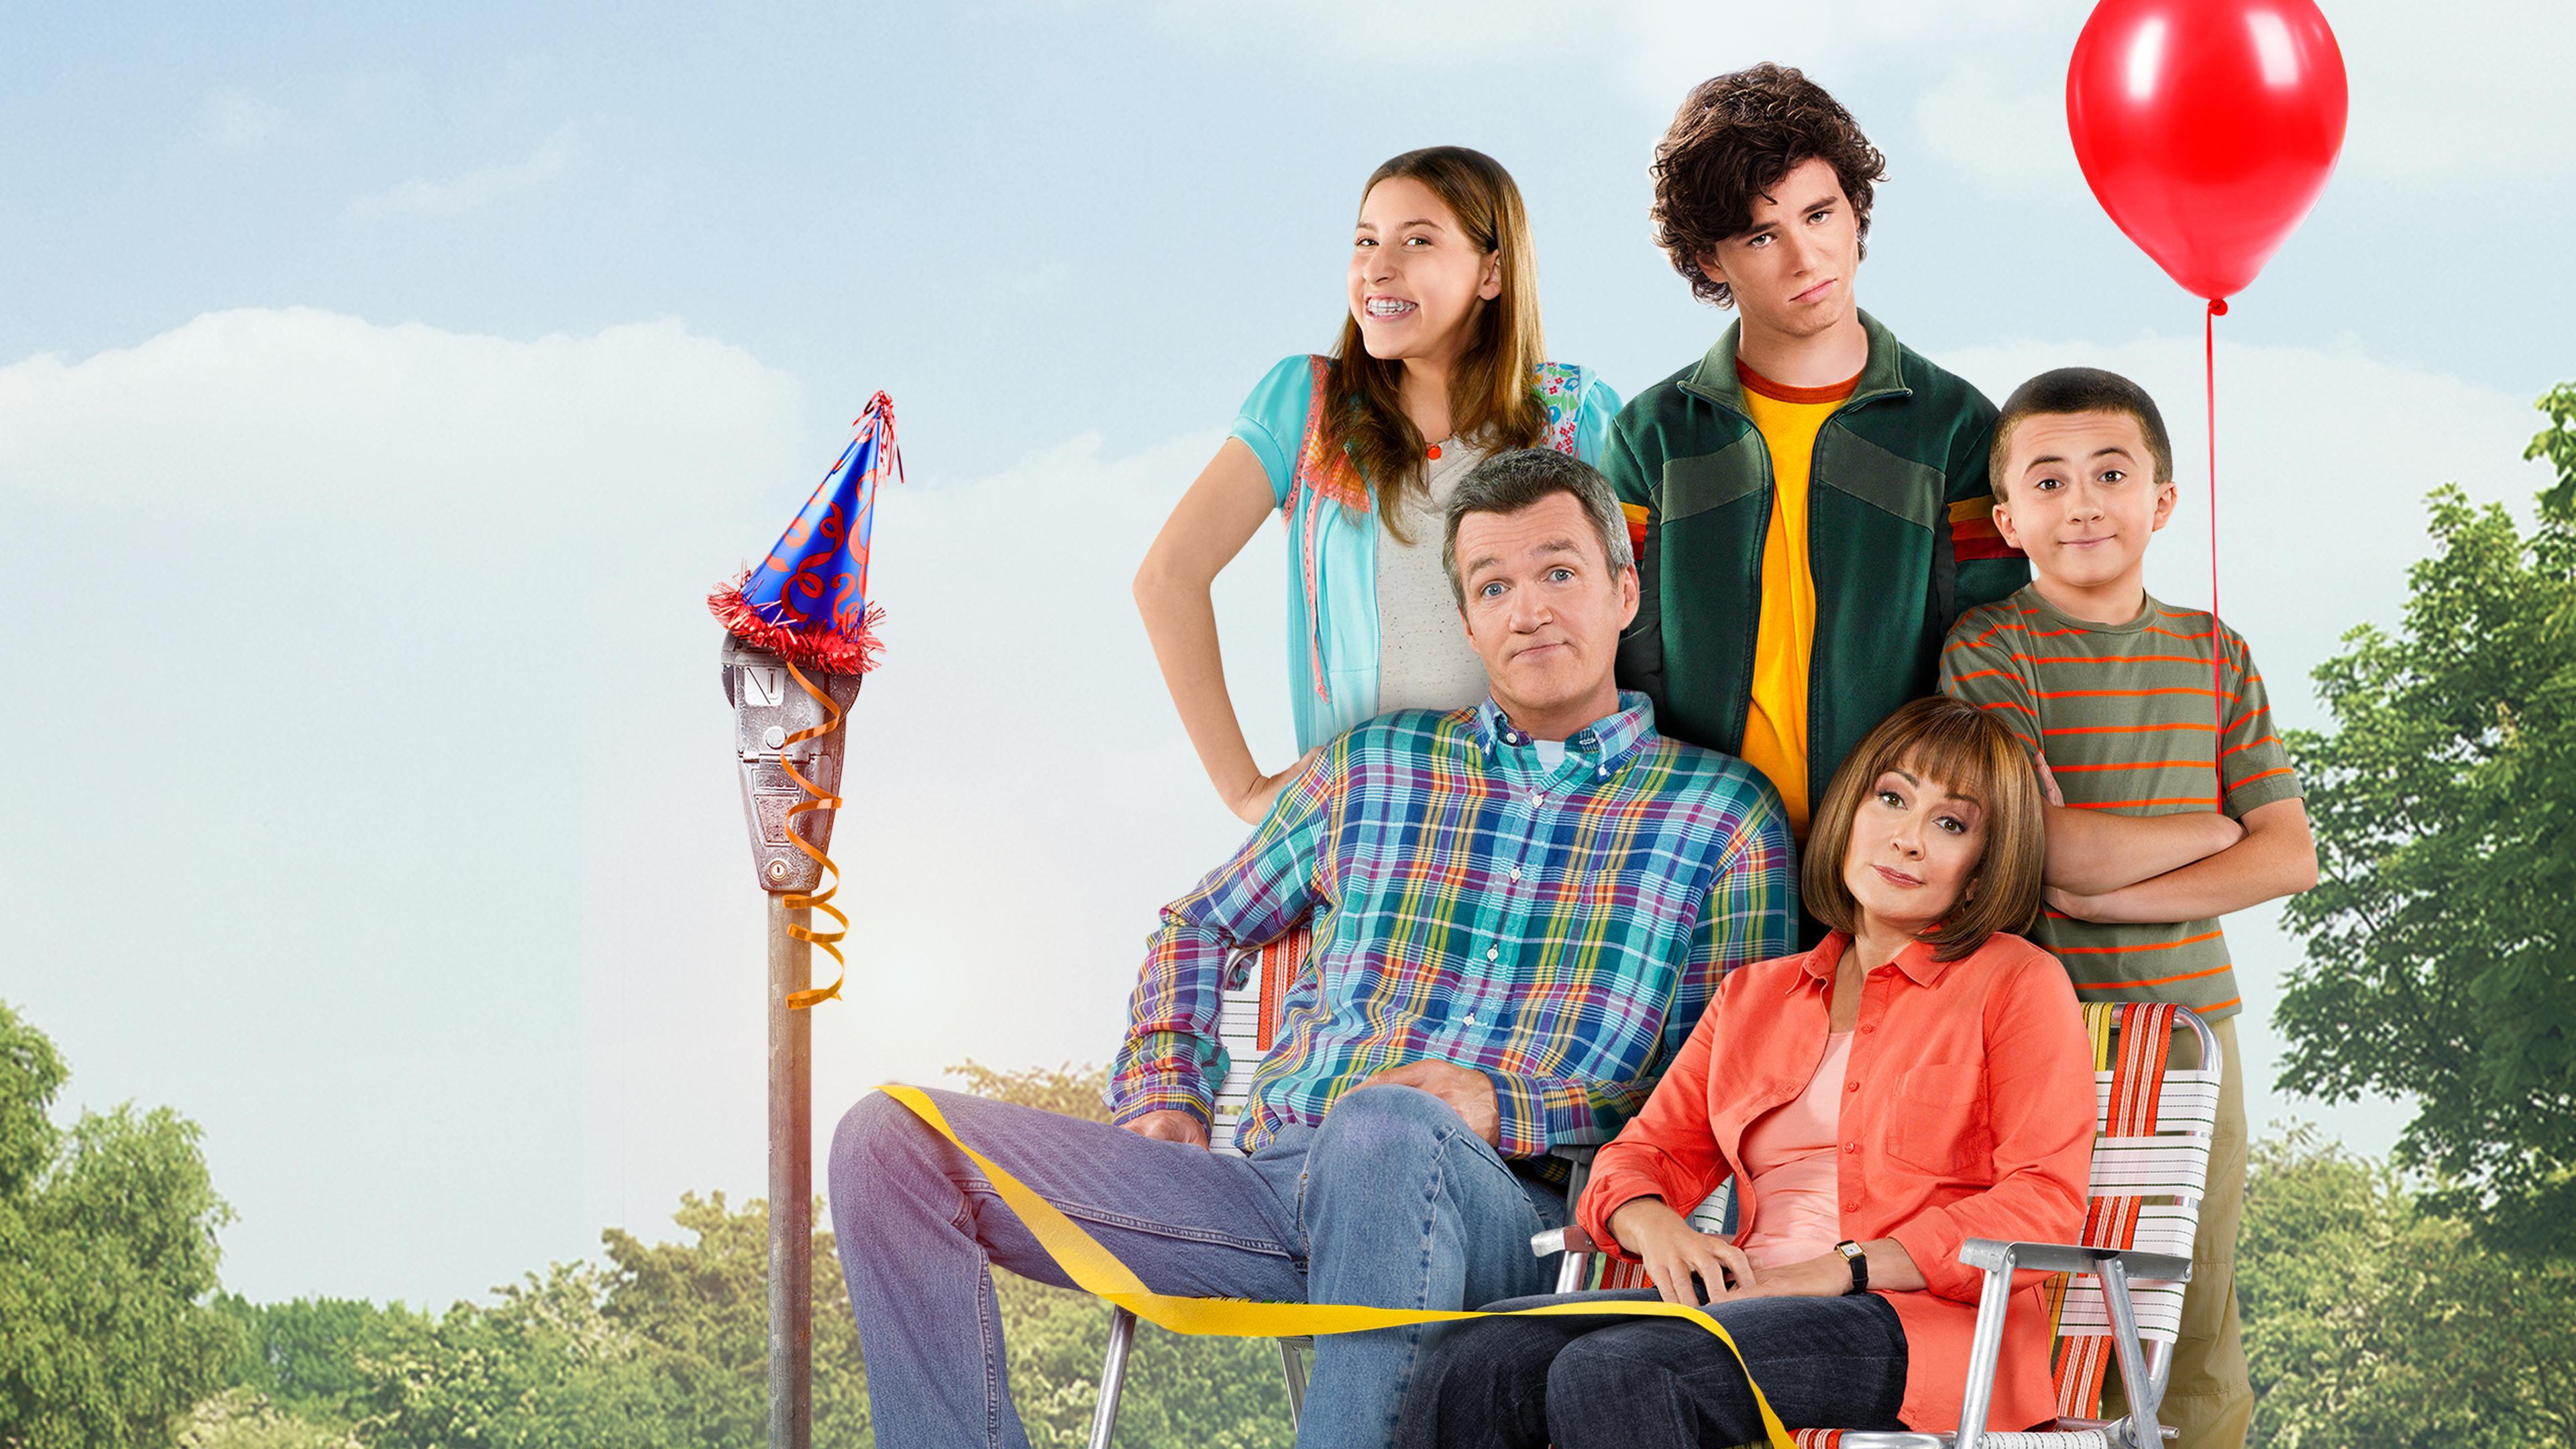 TV Show The Middle 4k Ultra HD Wallpaper